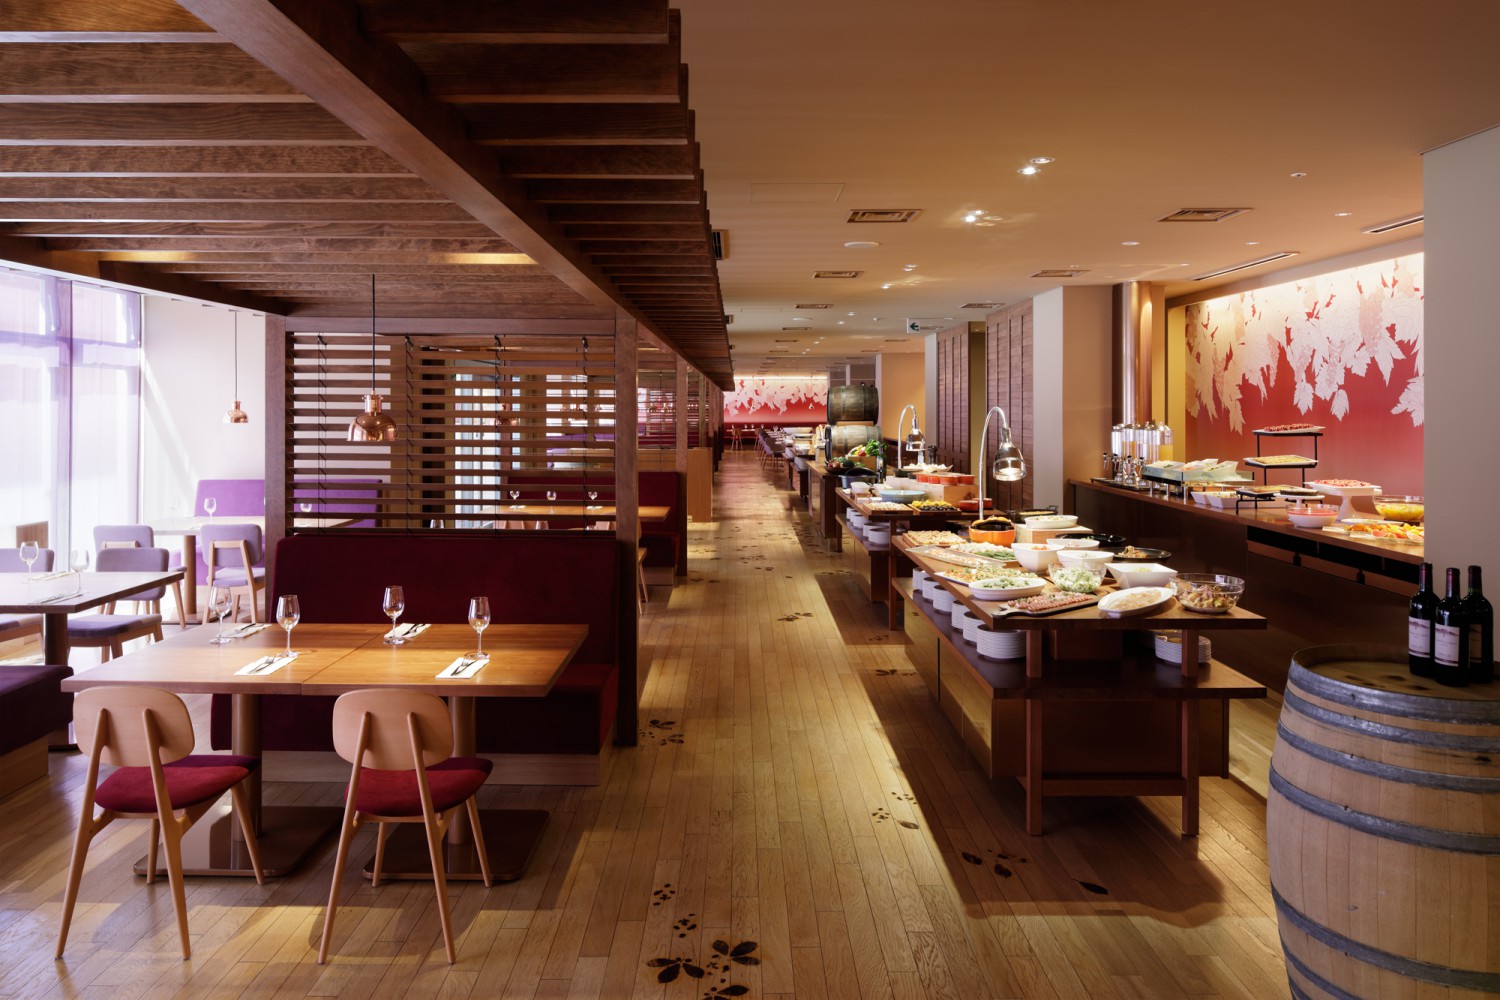 ▲ "YY grill" A buffet and grill restaurant where you can enjoy a lively meal while feeling the wine resort.Guests are welcomed with menus tailored to each scene, morning, day and night.Business hours (price): Breakfast = 07: 00-09: 30 (2,700 yen) | Lunch = 11: 30-13: 30 (2,480 yen) | Dinner = 17: 30-20: 00 (6,000 yen) * Any There is a child fee for the time, and reservation is required only for dinner.